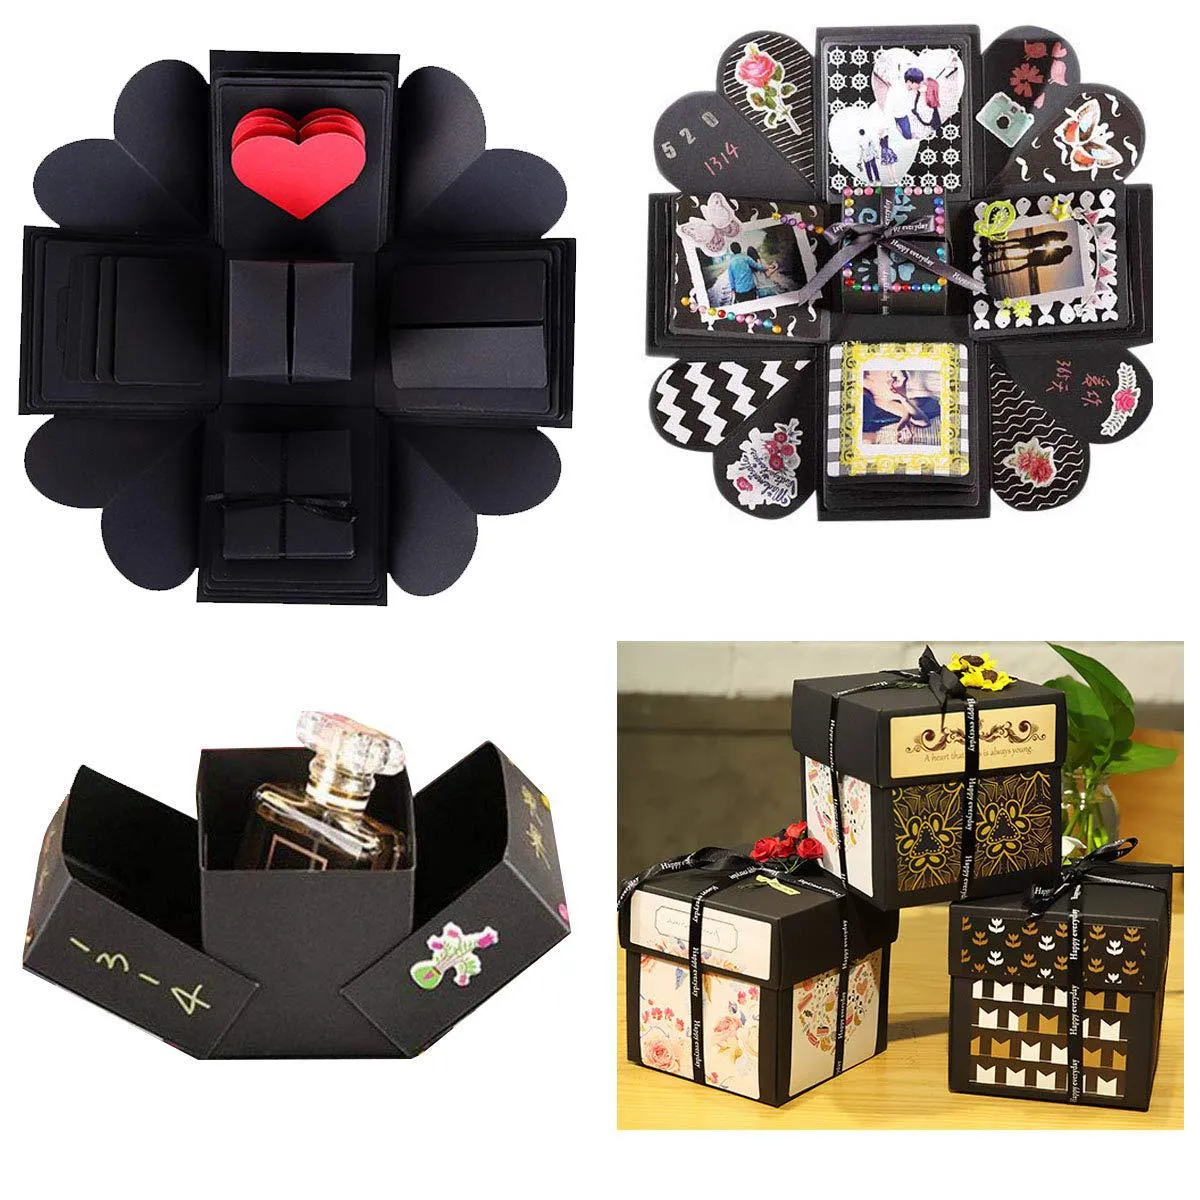 Explosion Gift Box Set Surprise Gift Photo Box Creative DIY Scrapbooking  Picture